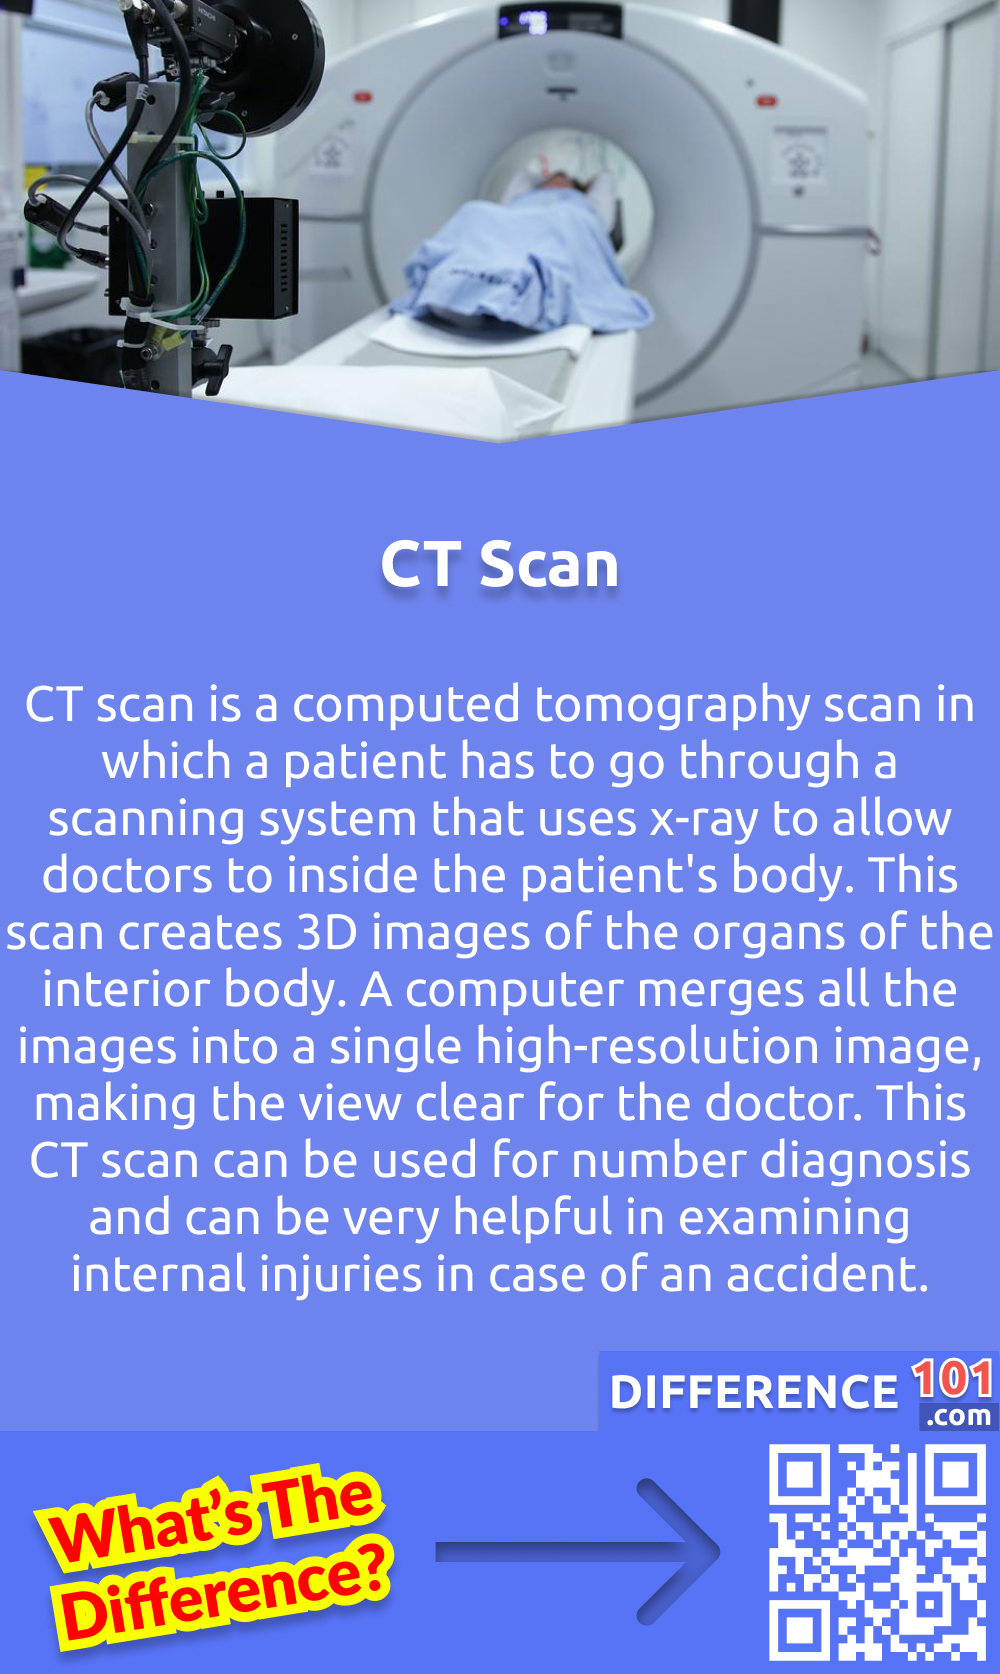 What is CT Scan? CT scan is a computed tomography scan in which a patient has to go through a scanning system that uses x-ray to allow doctors to inside the patient's body. This scan creates 3D images of the organs of the interior body. A computer merges all the images into a single high-resolution image, making the view clear for the doctor. This CT scan can be used for number diagnosis and can be very helpful in examining internal injuries in case of an accident.